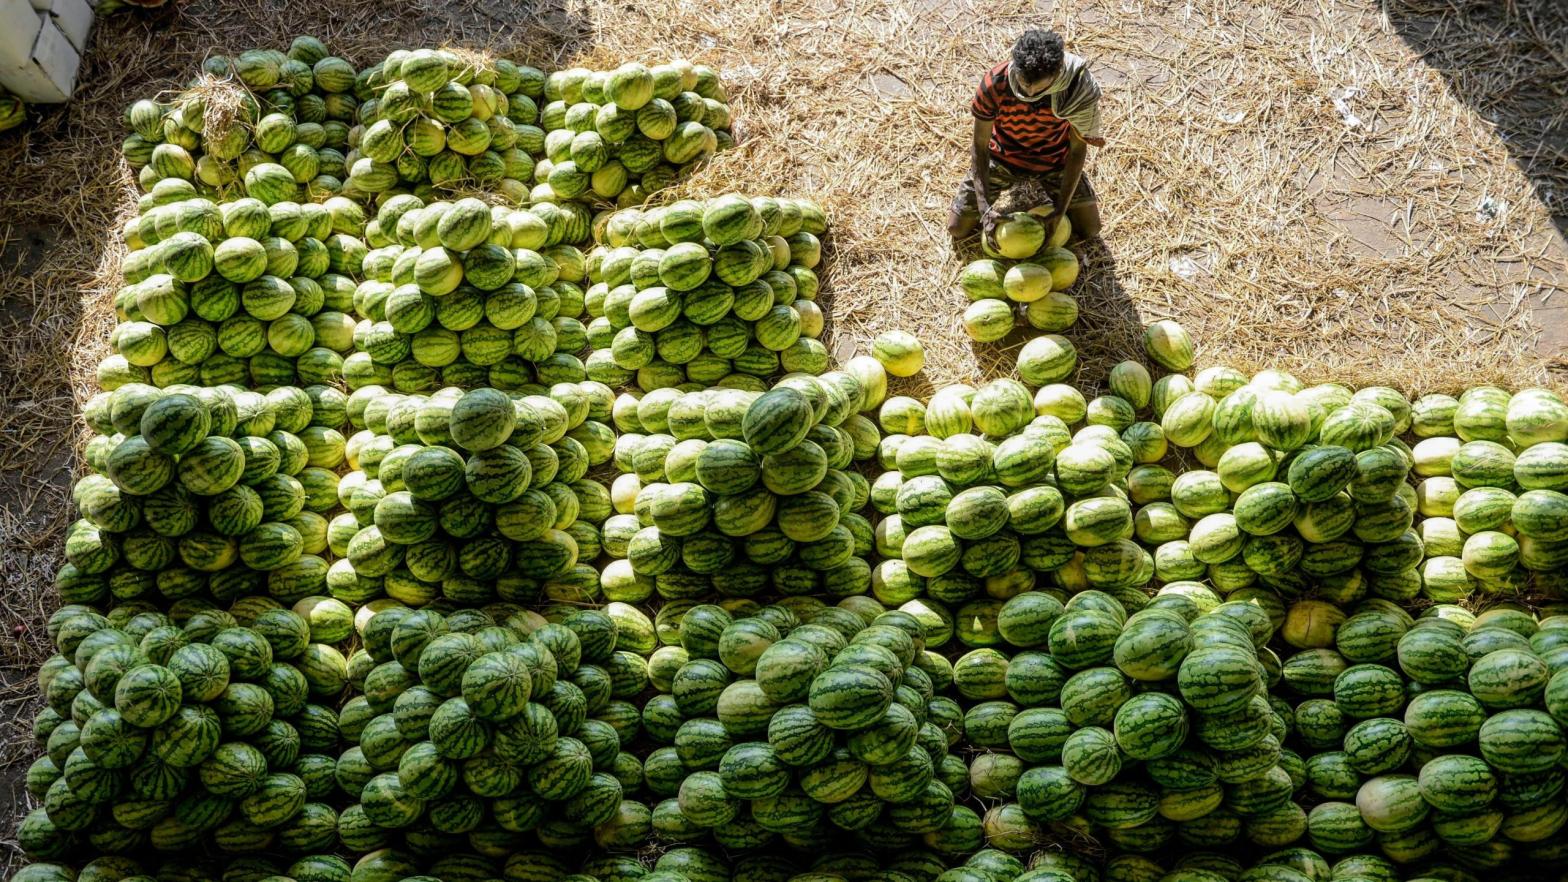 Watermelons at a Hyderabad fruit market in 2020. (Photo: NOAH SEELAM/AFP via Getty Images, Getty Images)